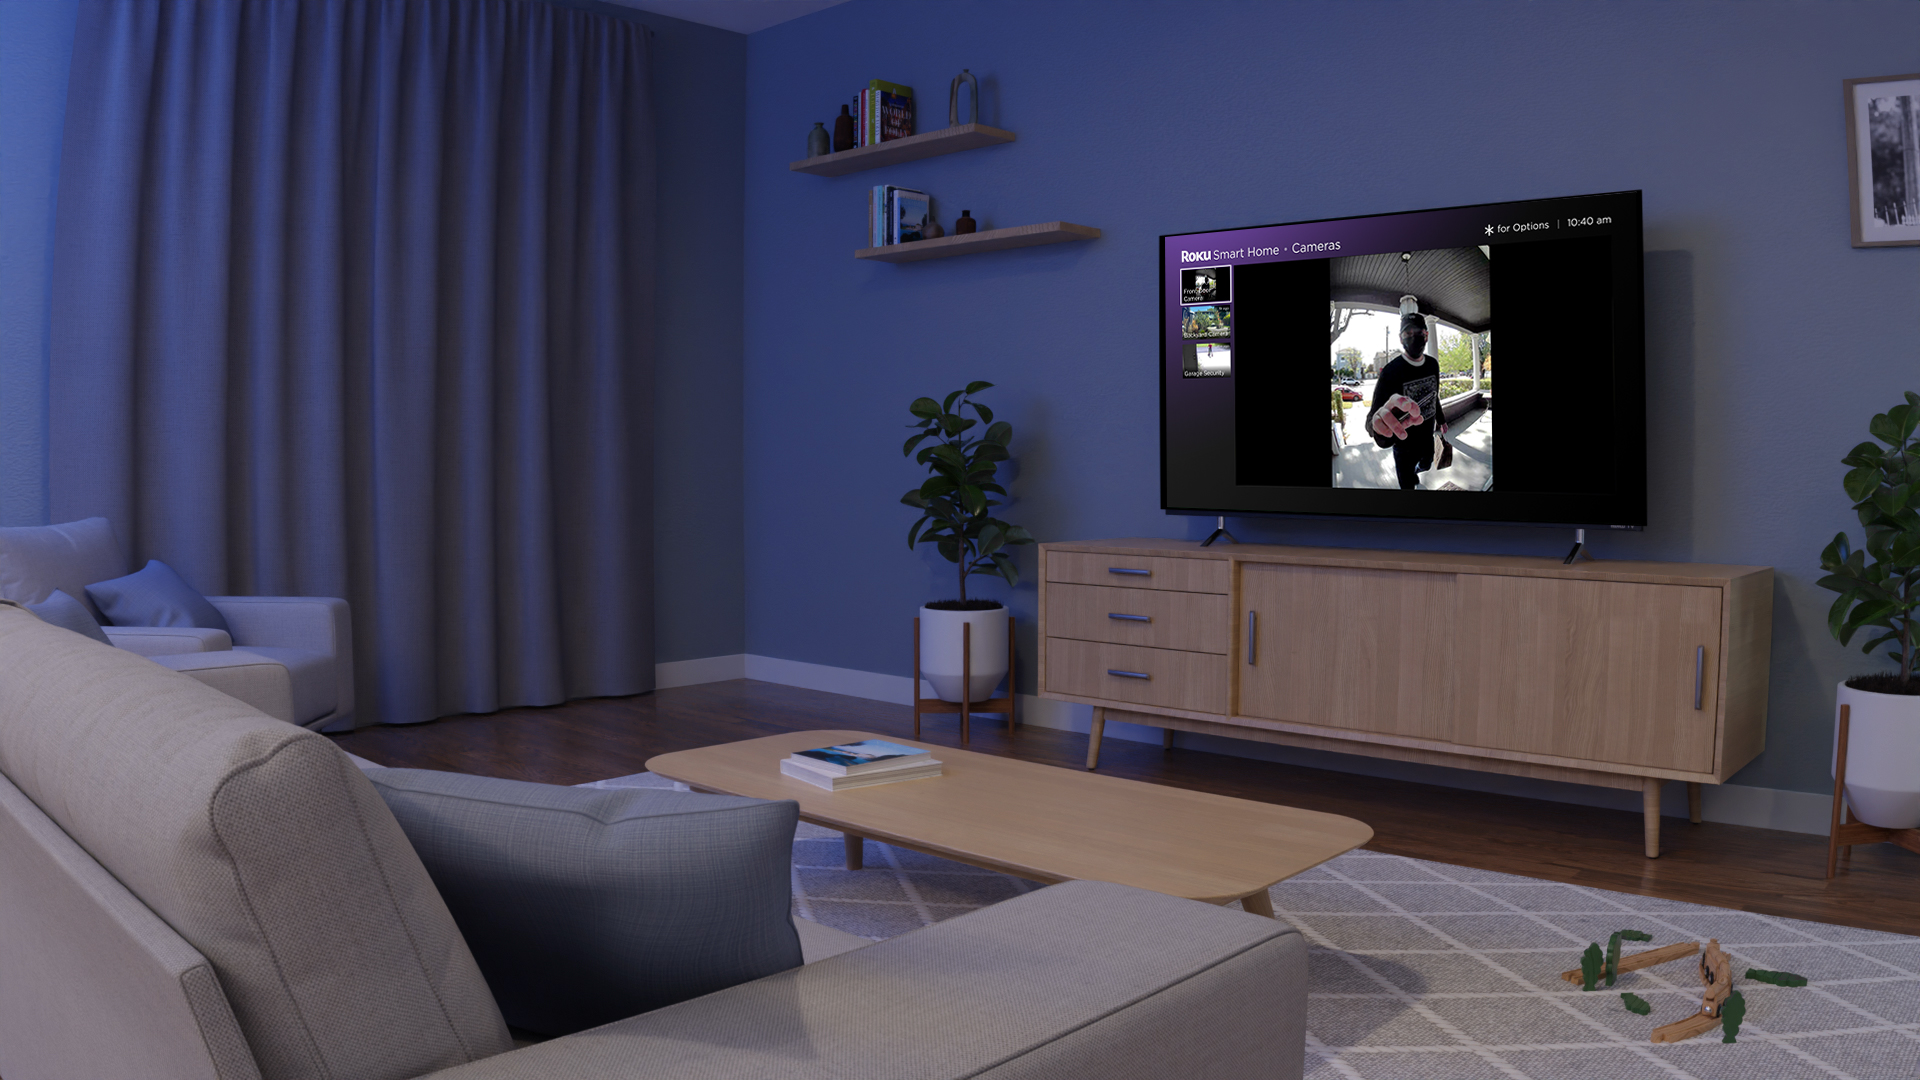 Roku launches range of smart home products - Digital TV Europe